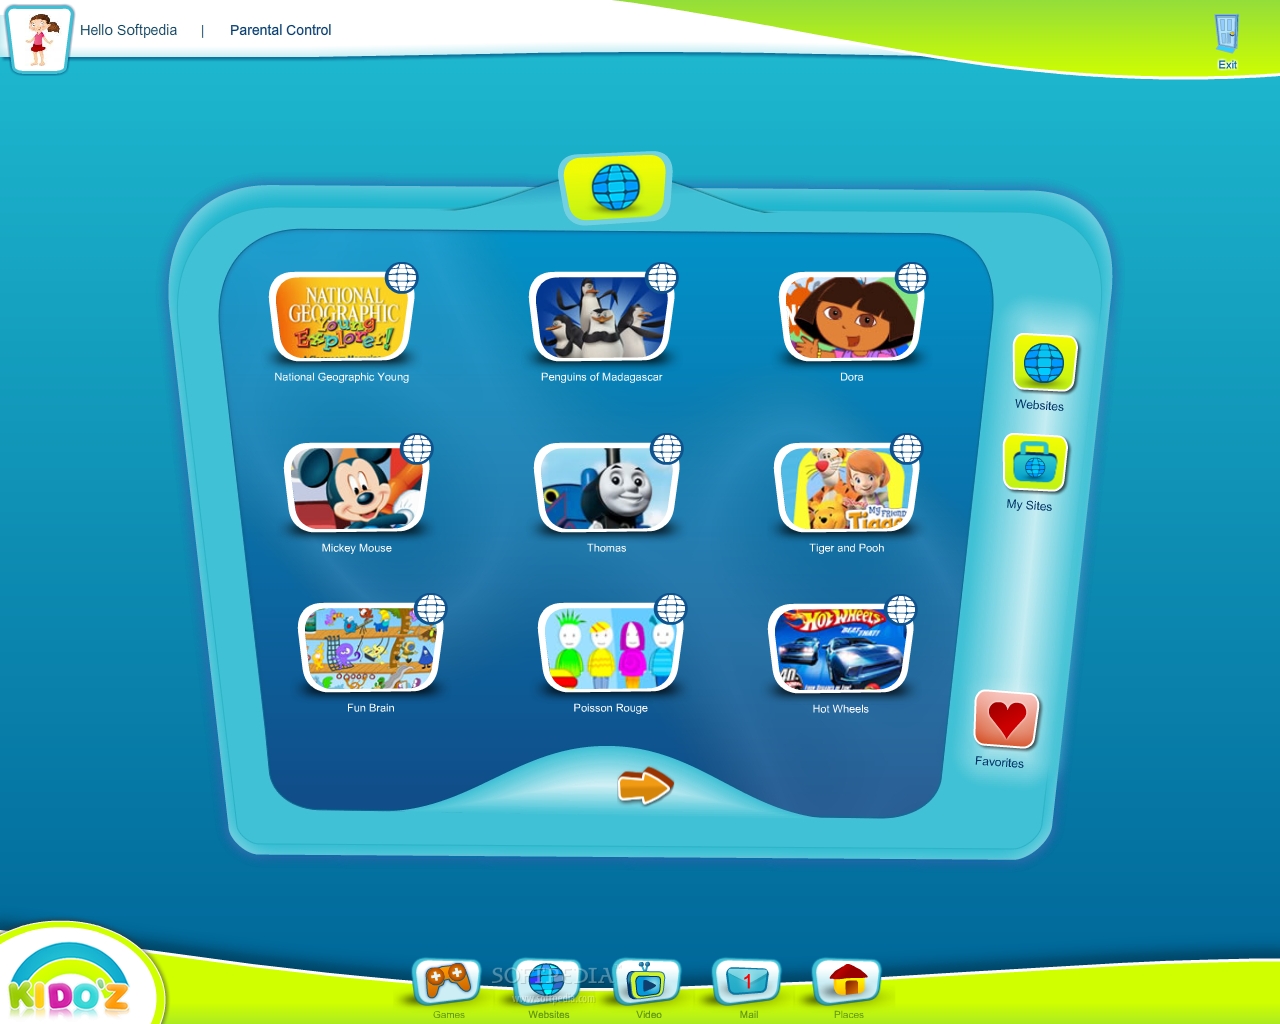 KIDO’Z: The App for Android Kids